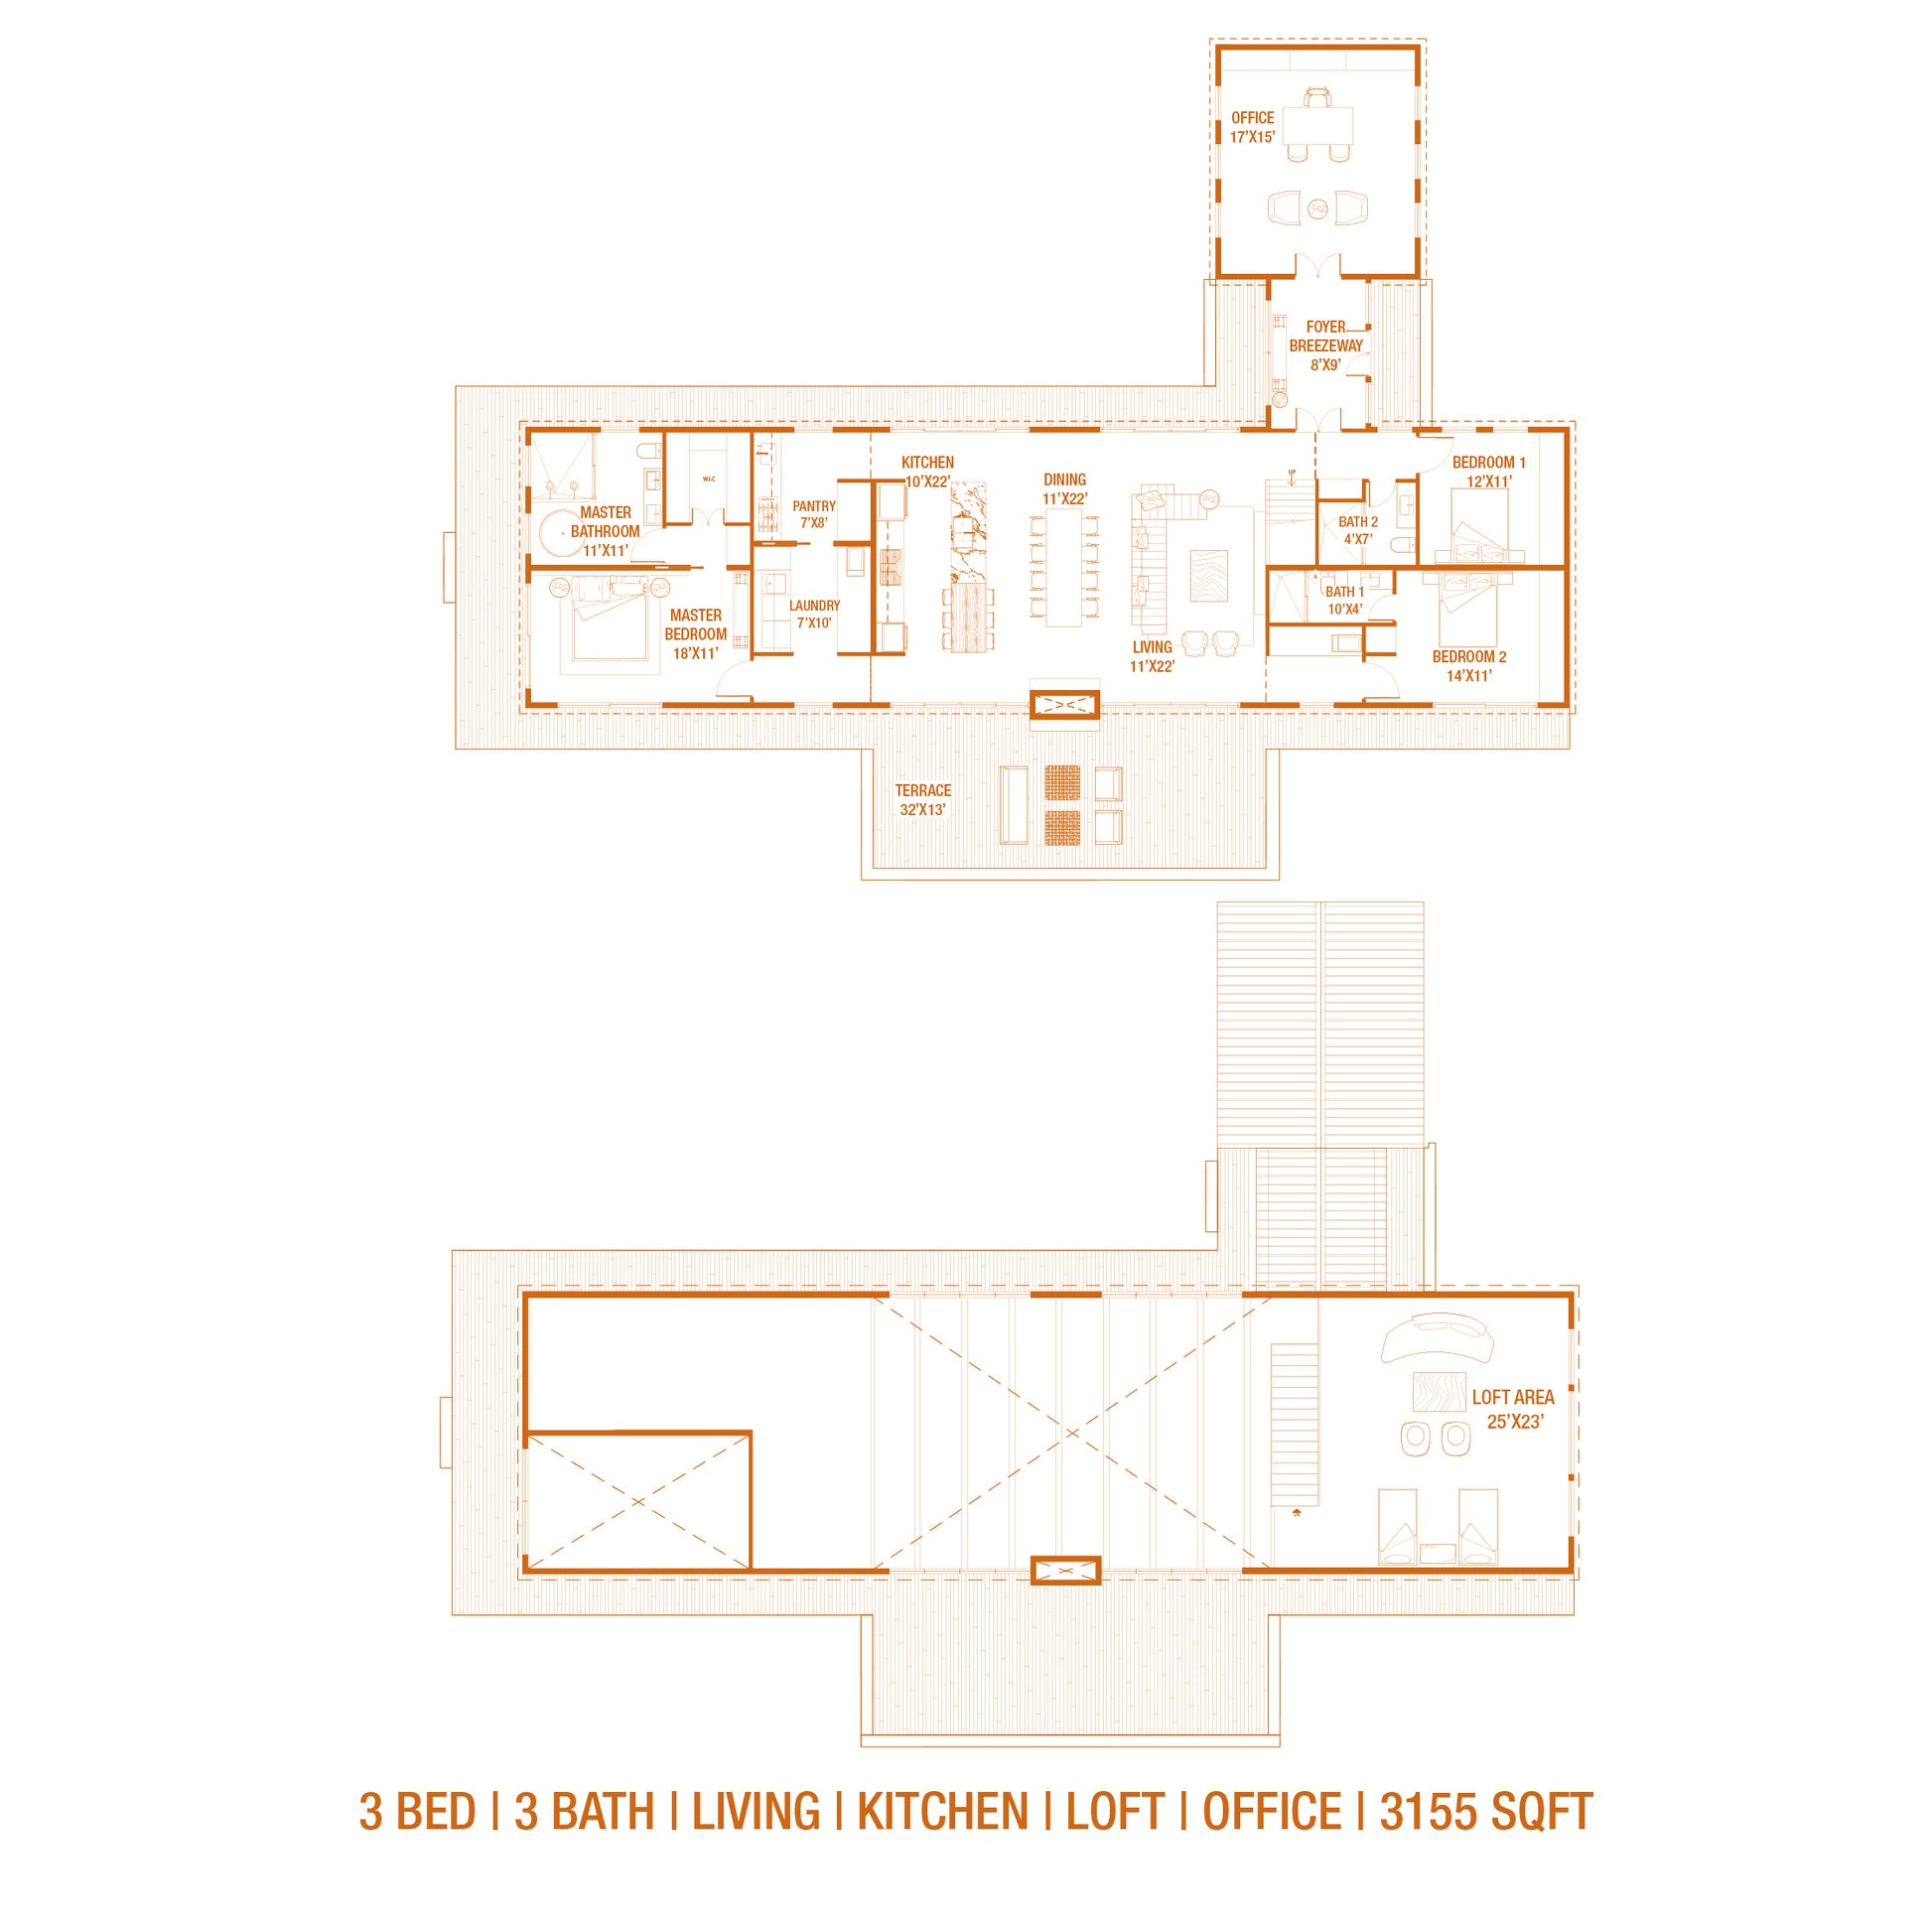 Floor plan layout of the main and loft level from architectural cabin design